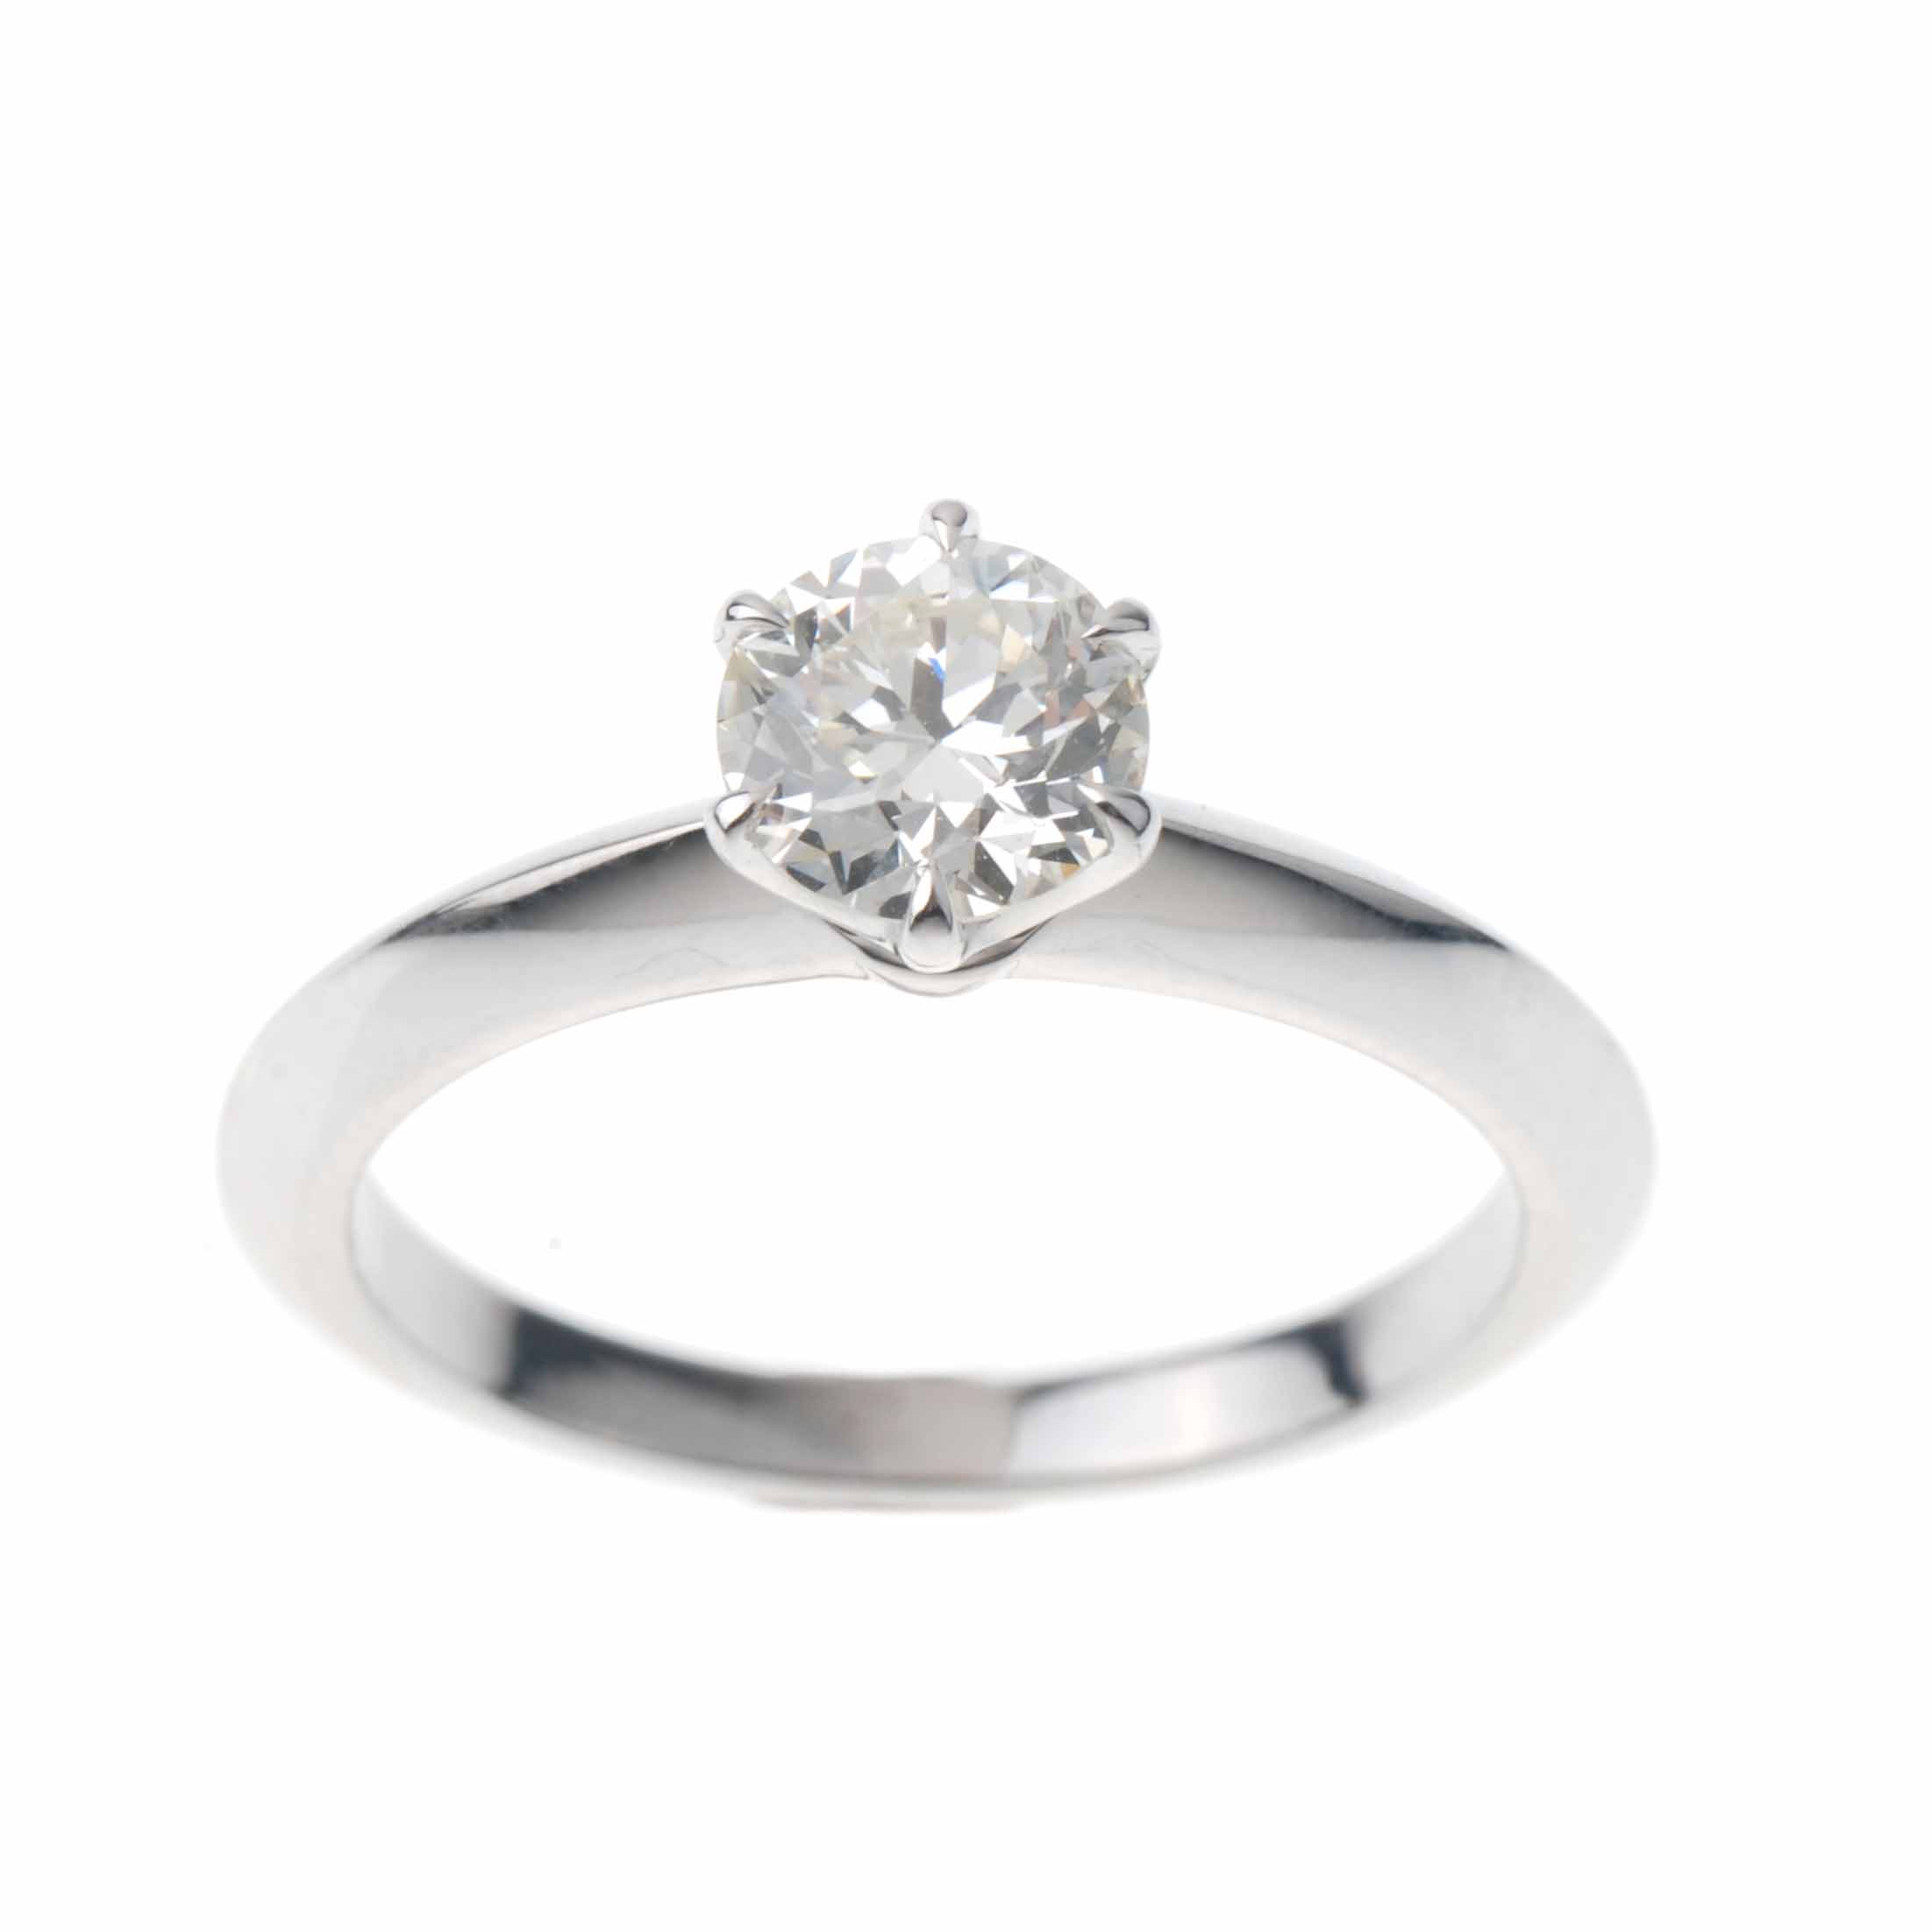 TIFFANY SOLITAIRE RING.